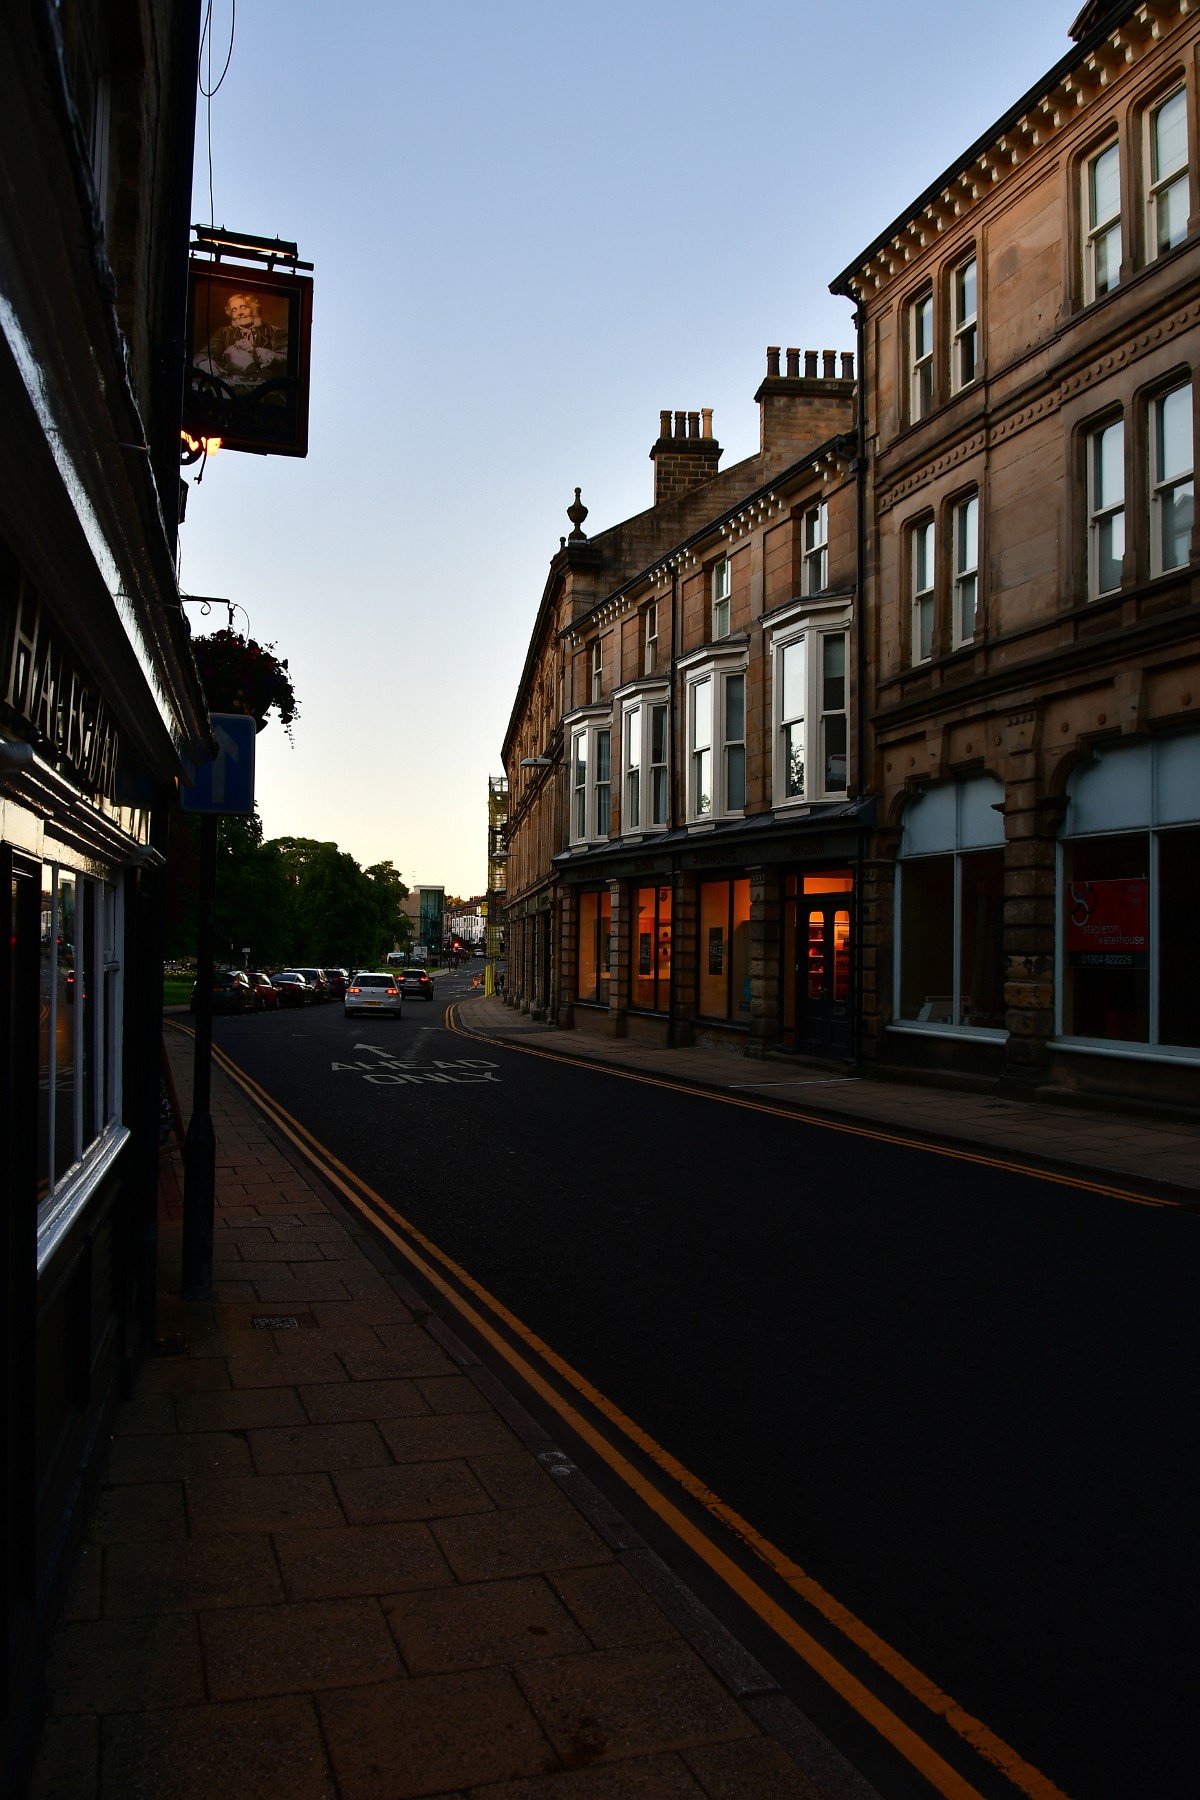 Looking Down the Road in Front of Hales Bar, The Oldest Bar in Harrogate 